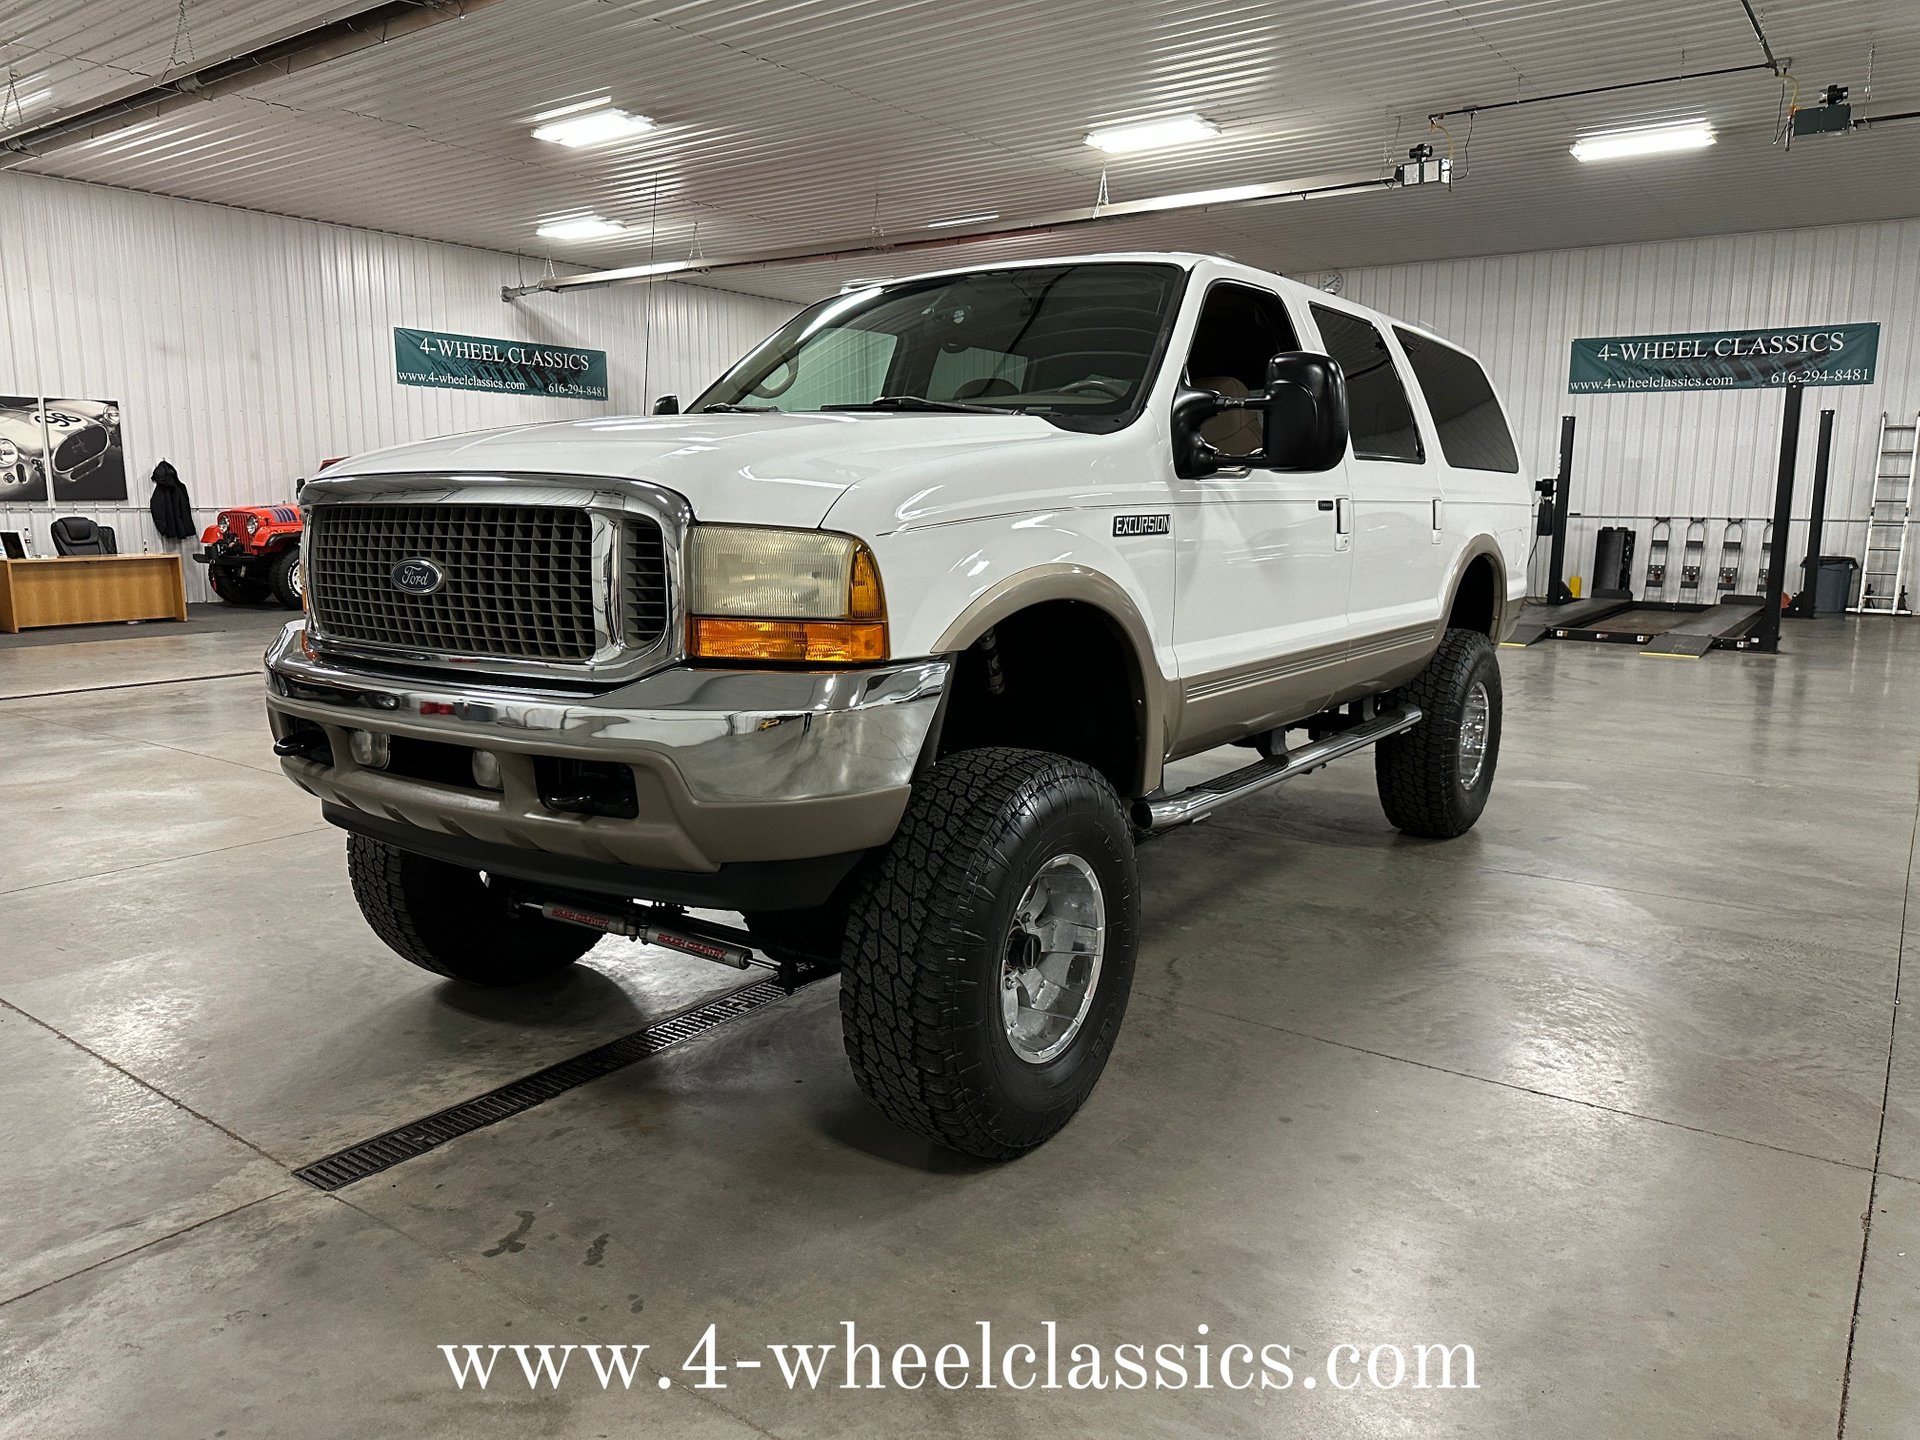 2001 excursion limited tire size